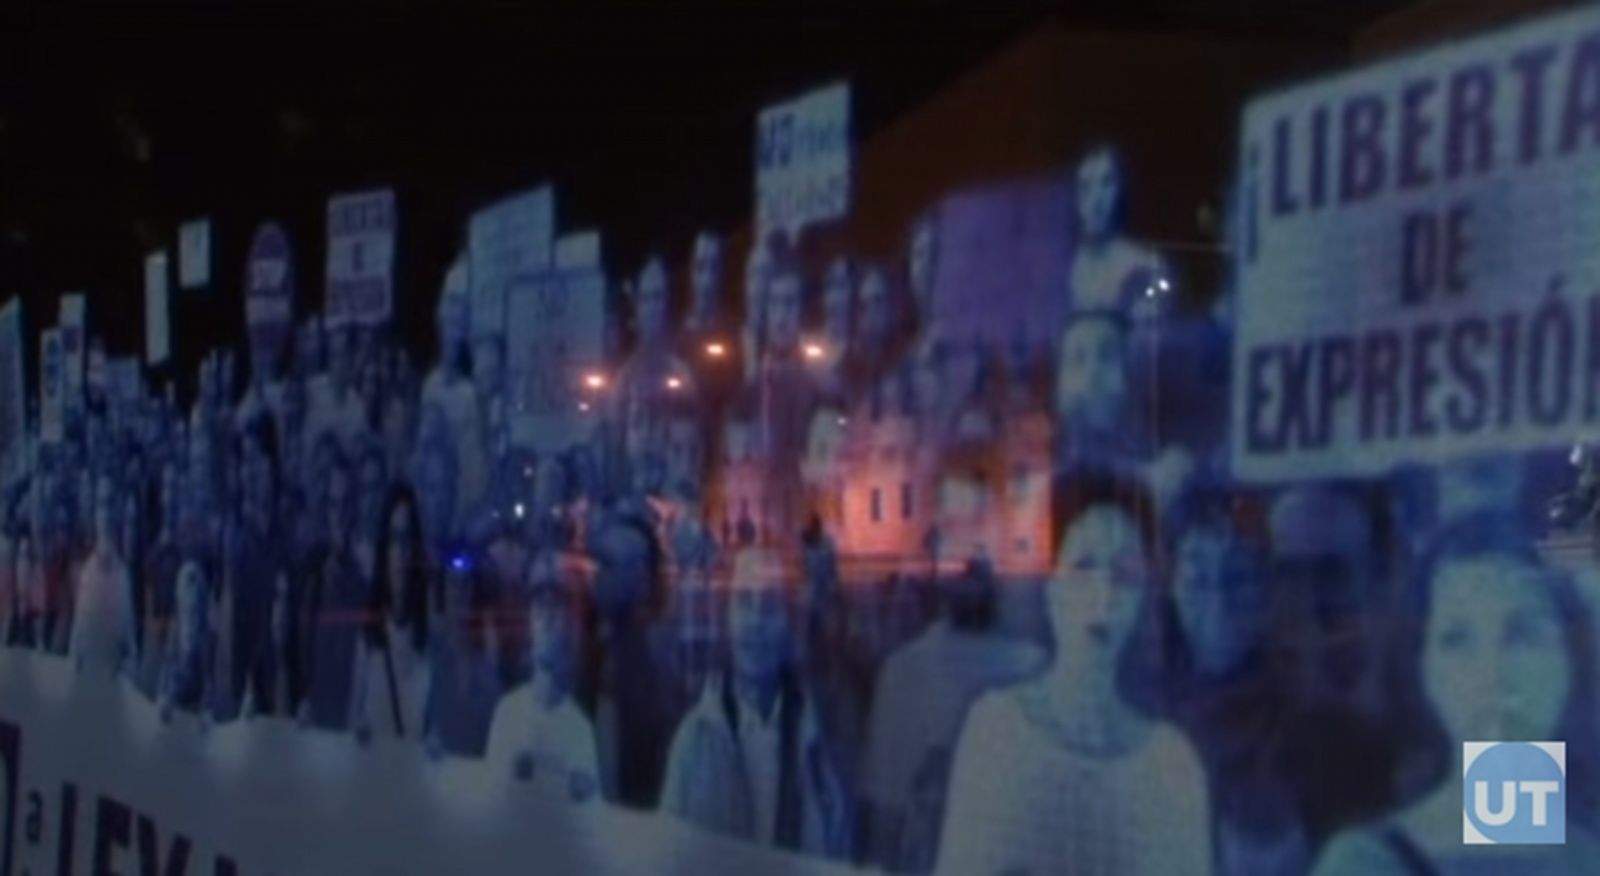 New laws in Spain would criminalize certain forms of protest so human rights groups rallied in holographic form. Photo: Ukraine Today/YouTube